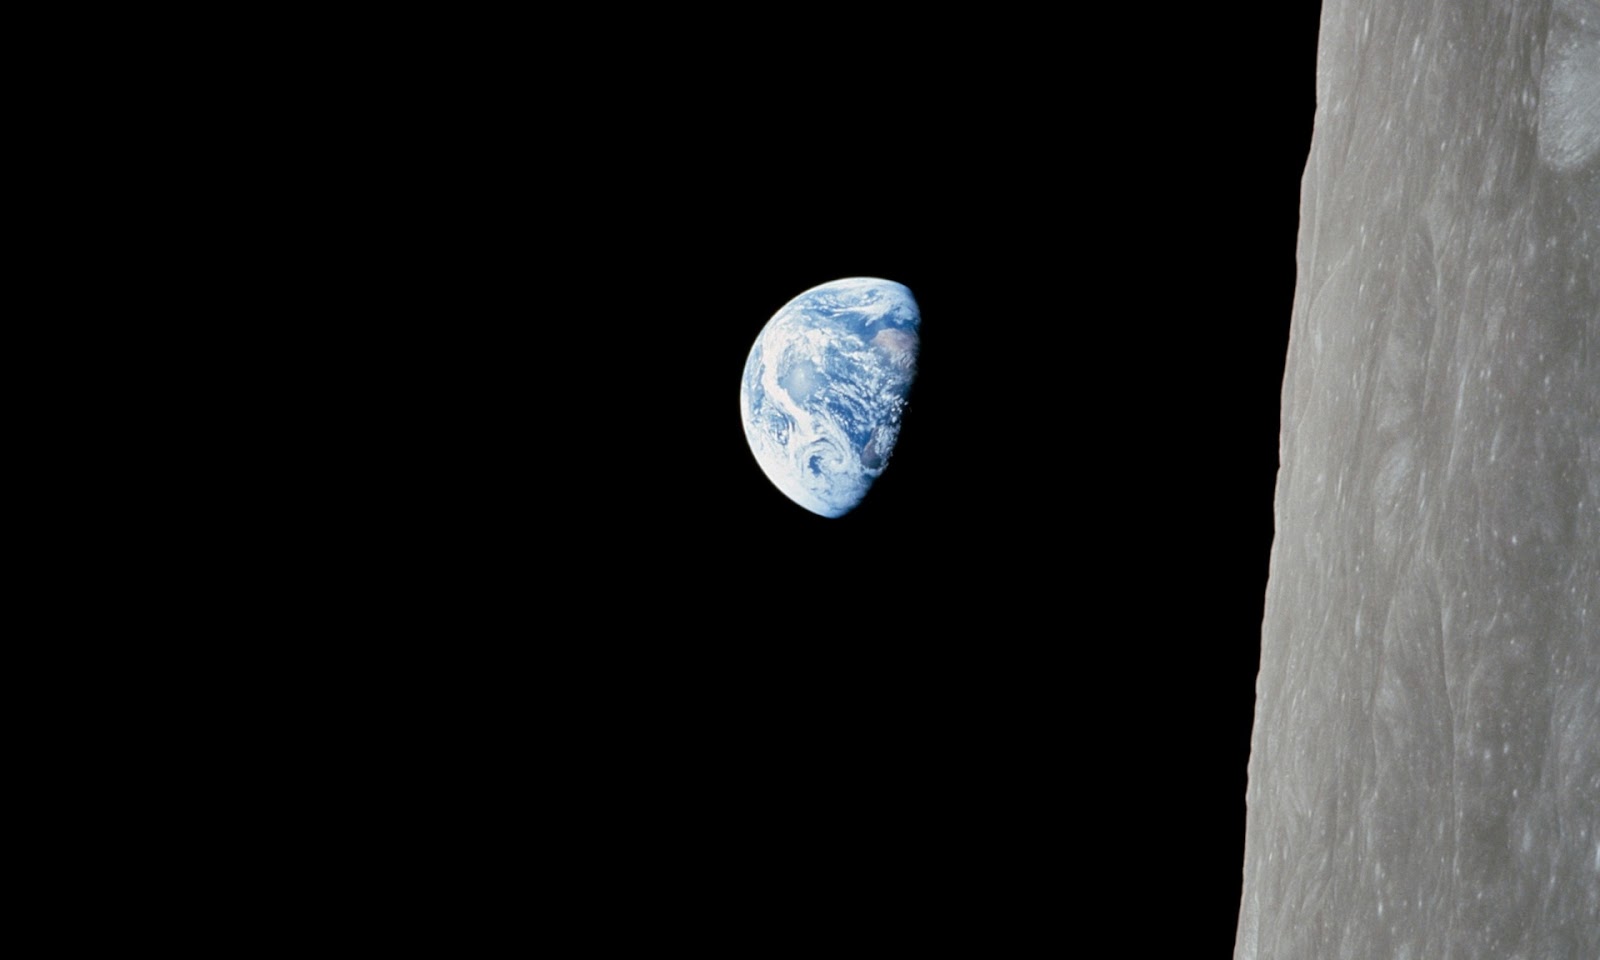 Photograph, Bill Anders/Appolo 8: The ‘blue, beautiful world’ seen from space.